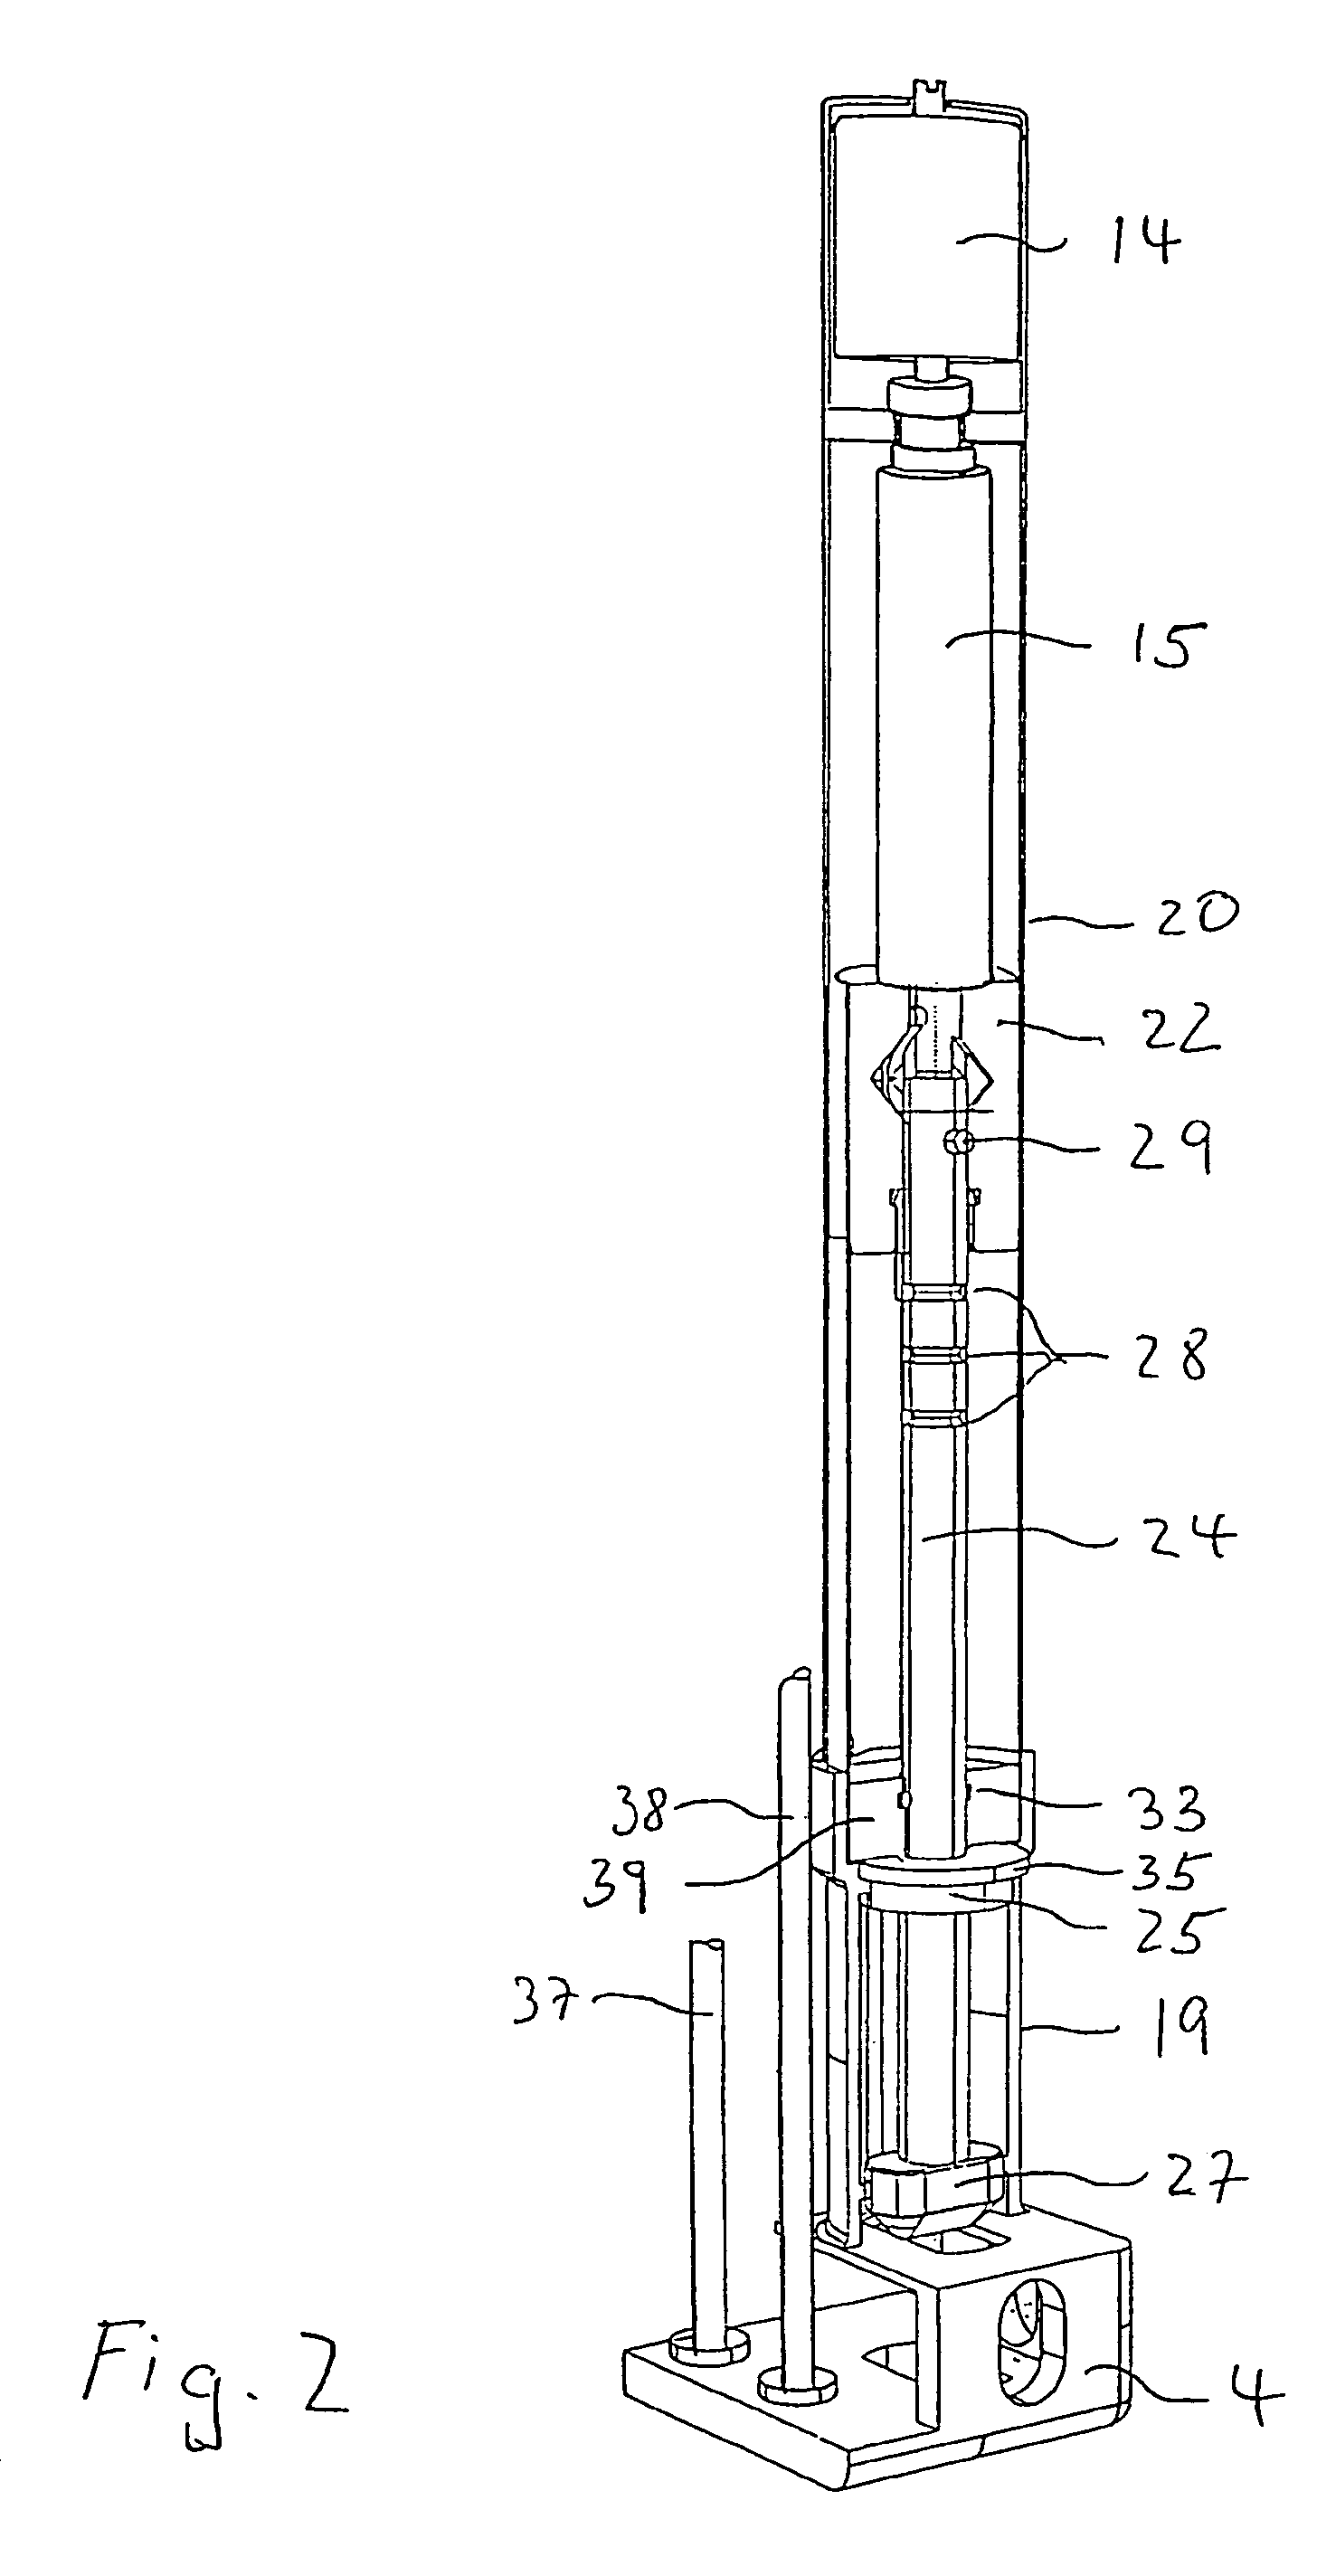 Container comprising an electrically driven interlocking mechanism